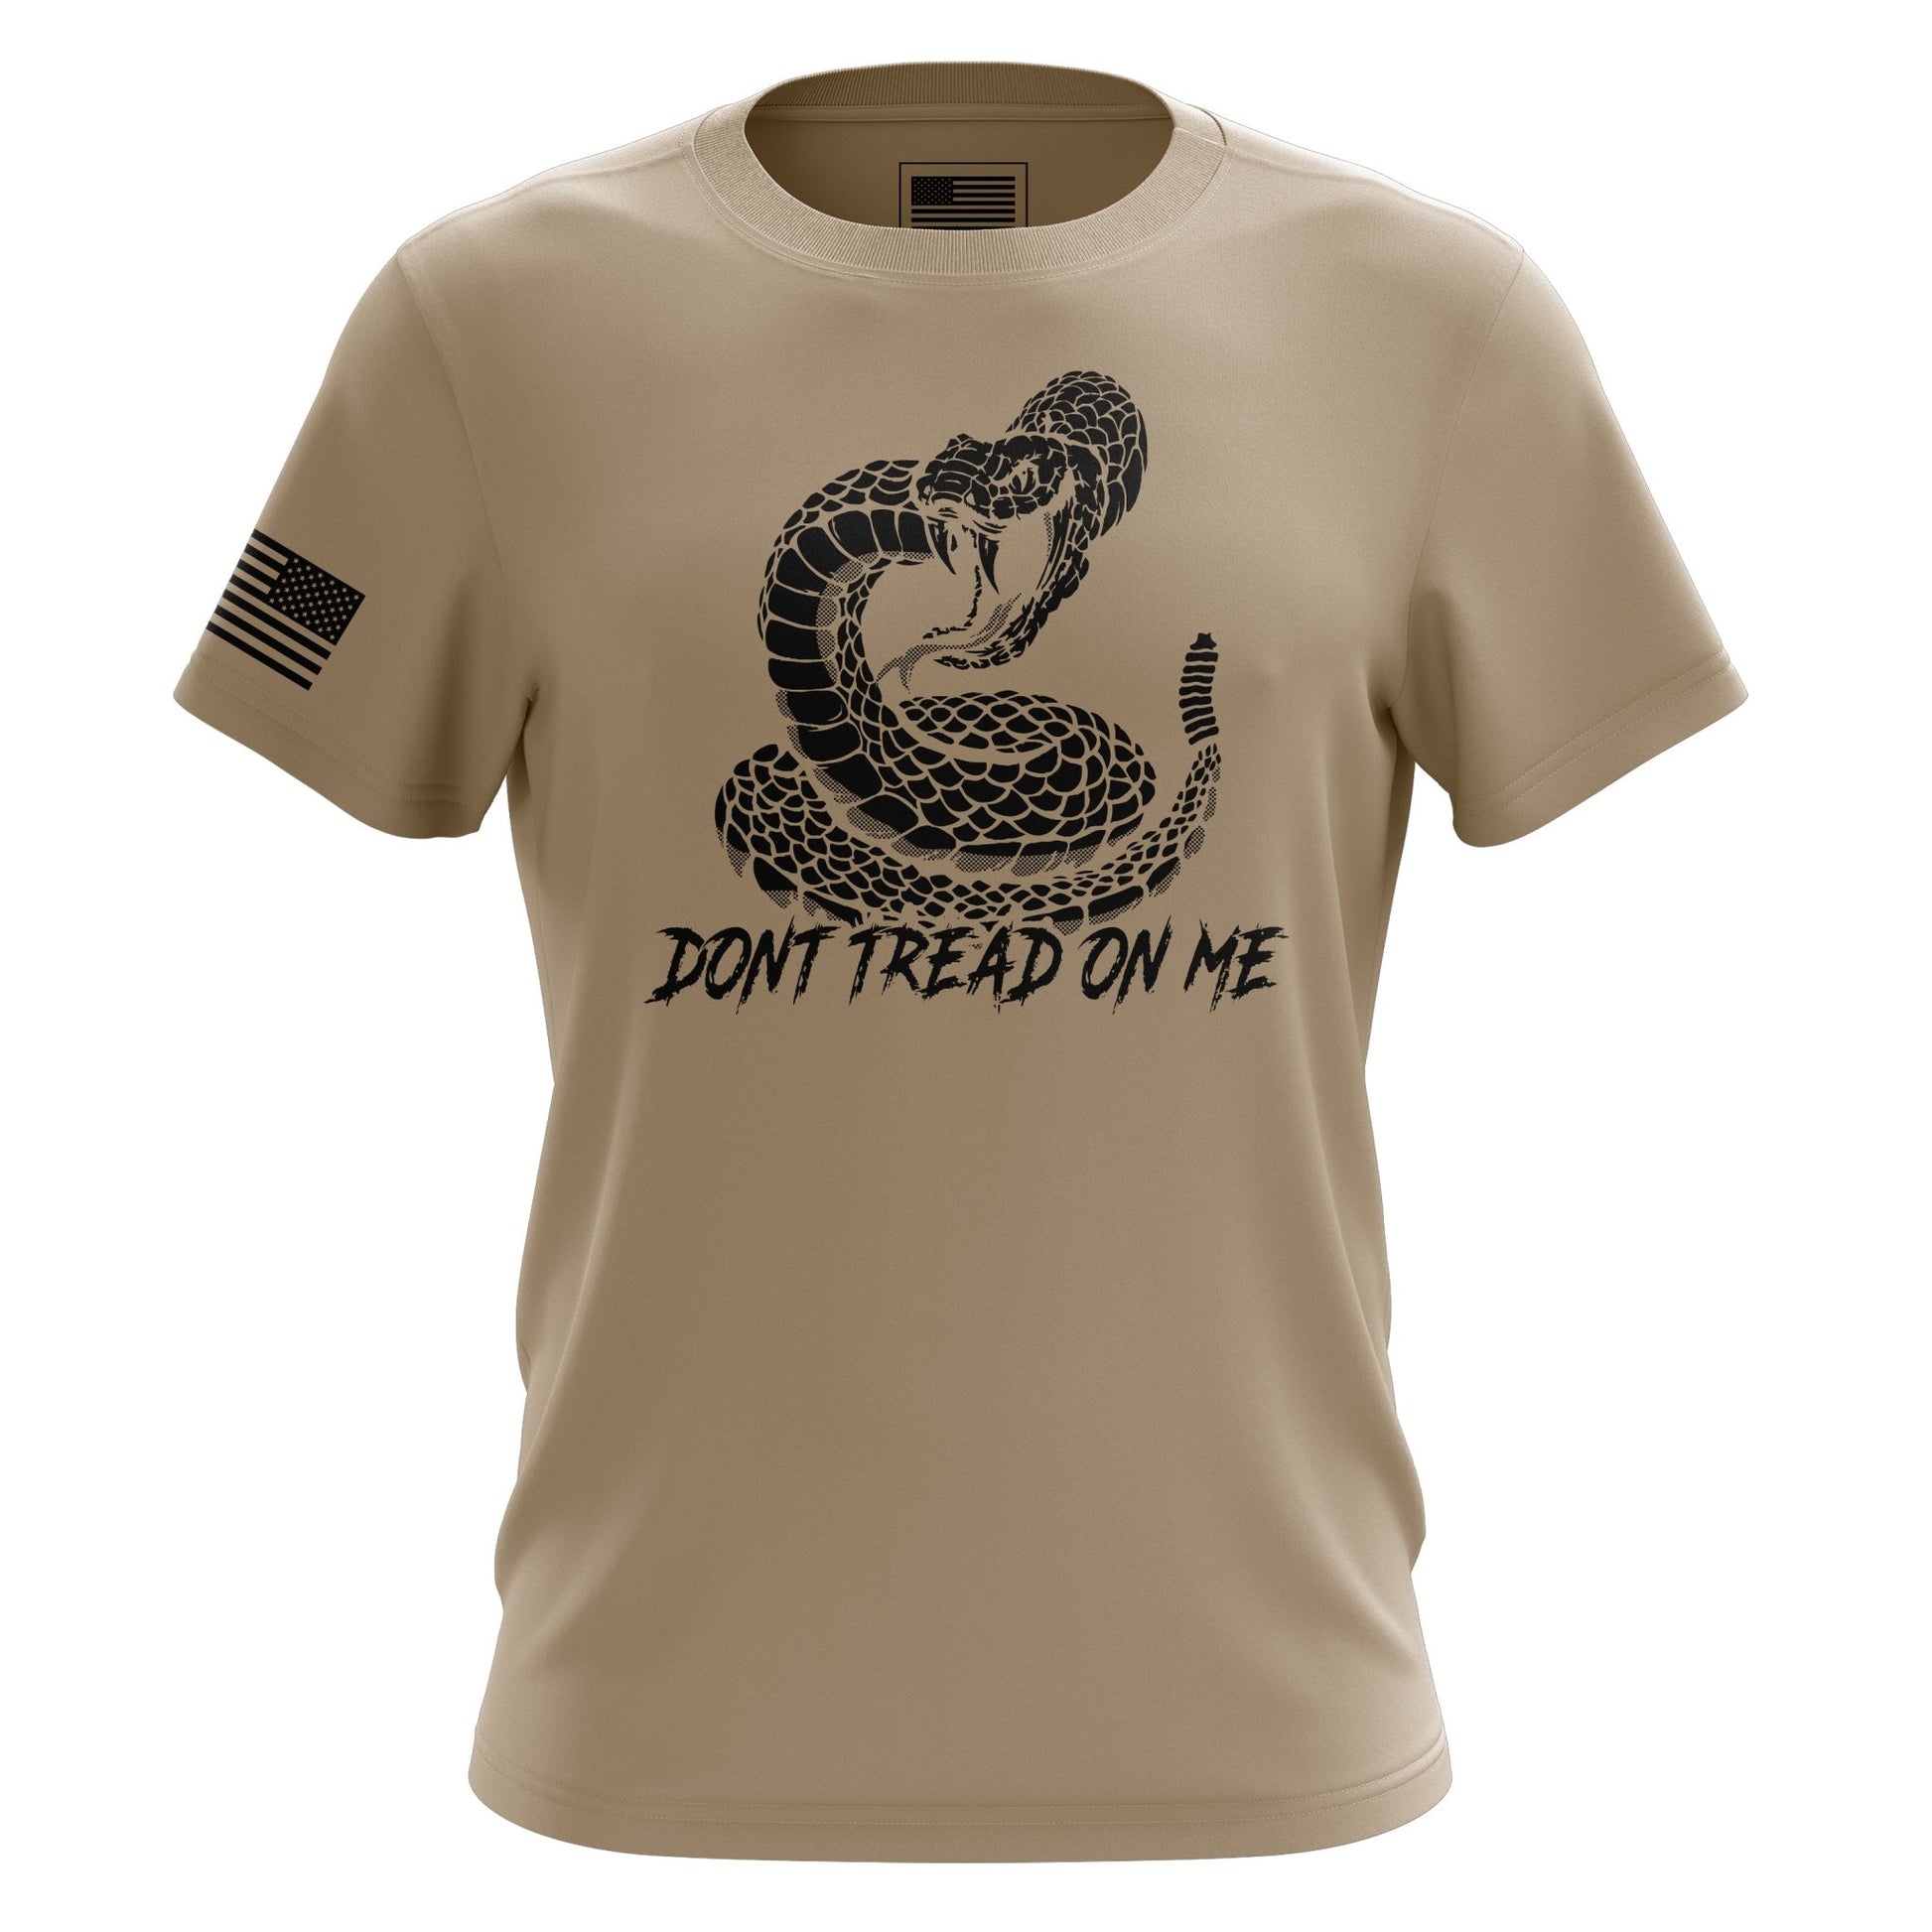 Don't Tread On Me - Tactical Pro Supply, LLC